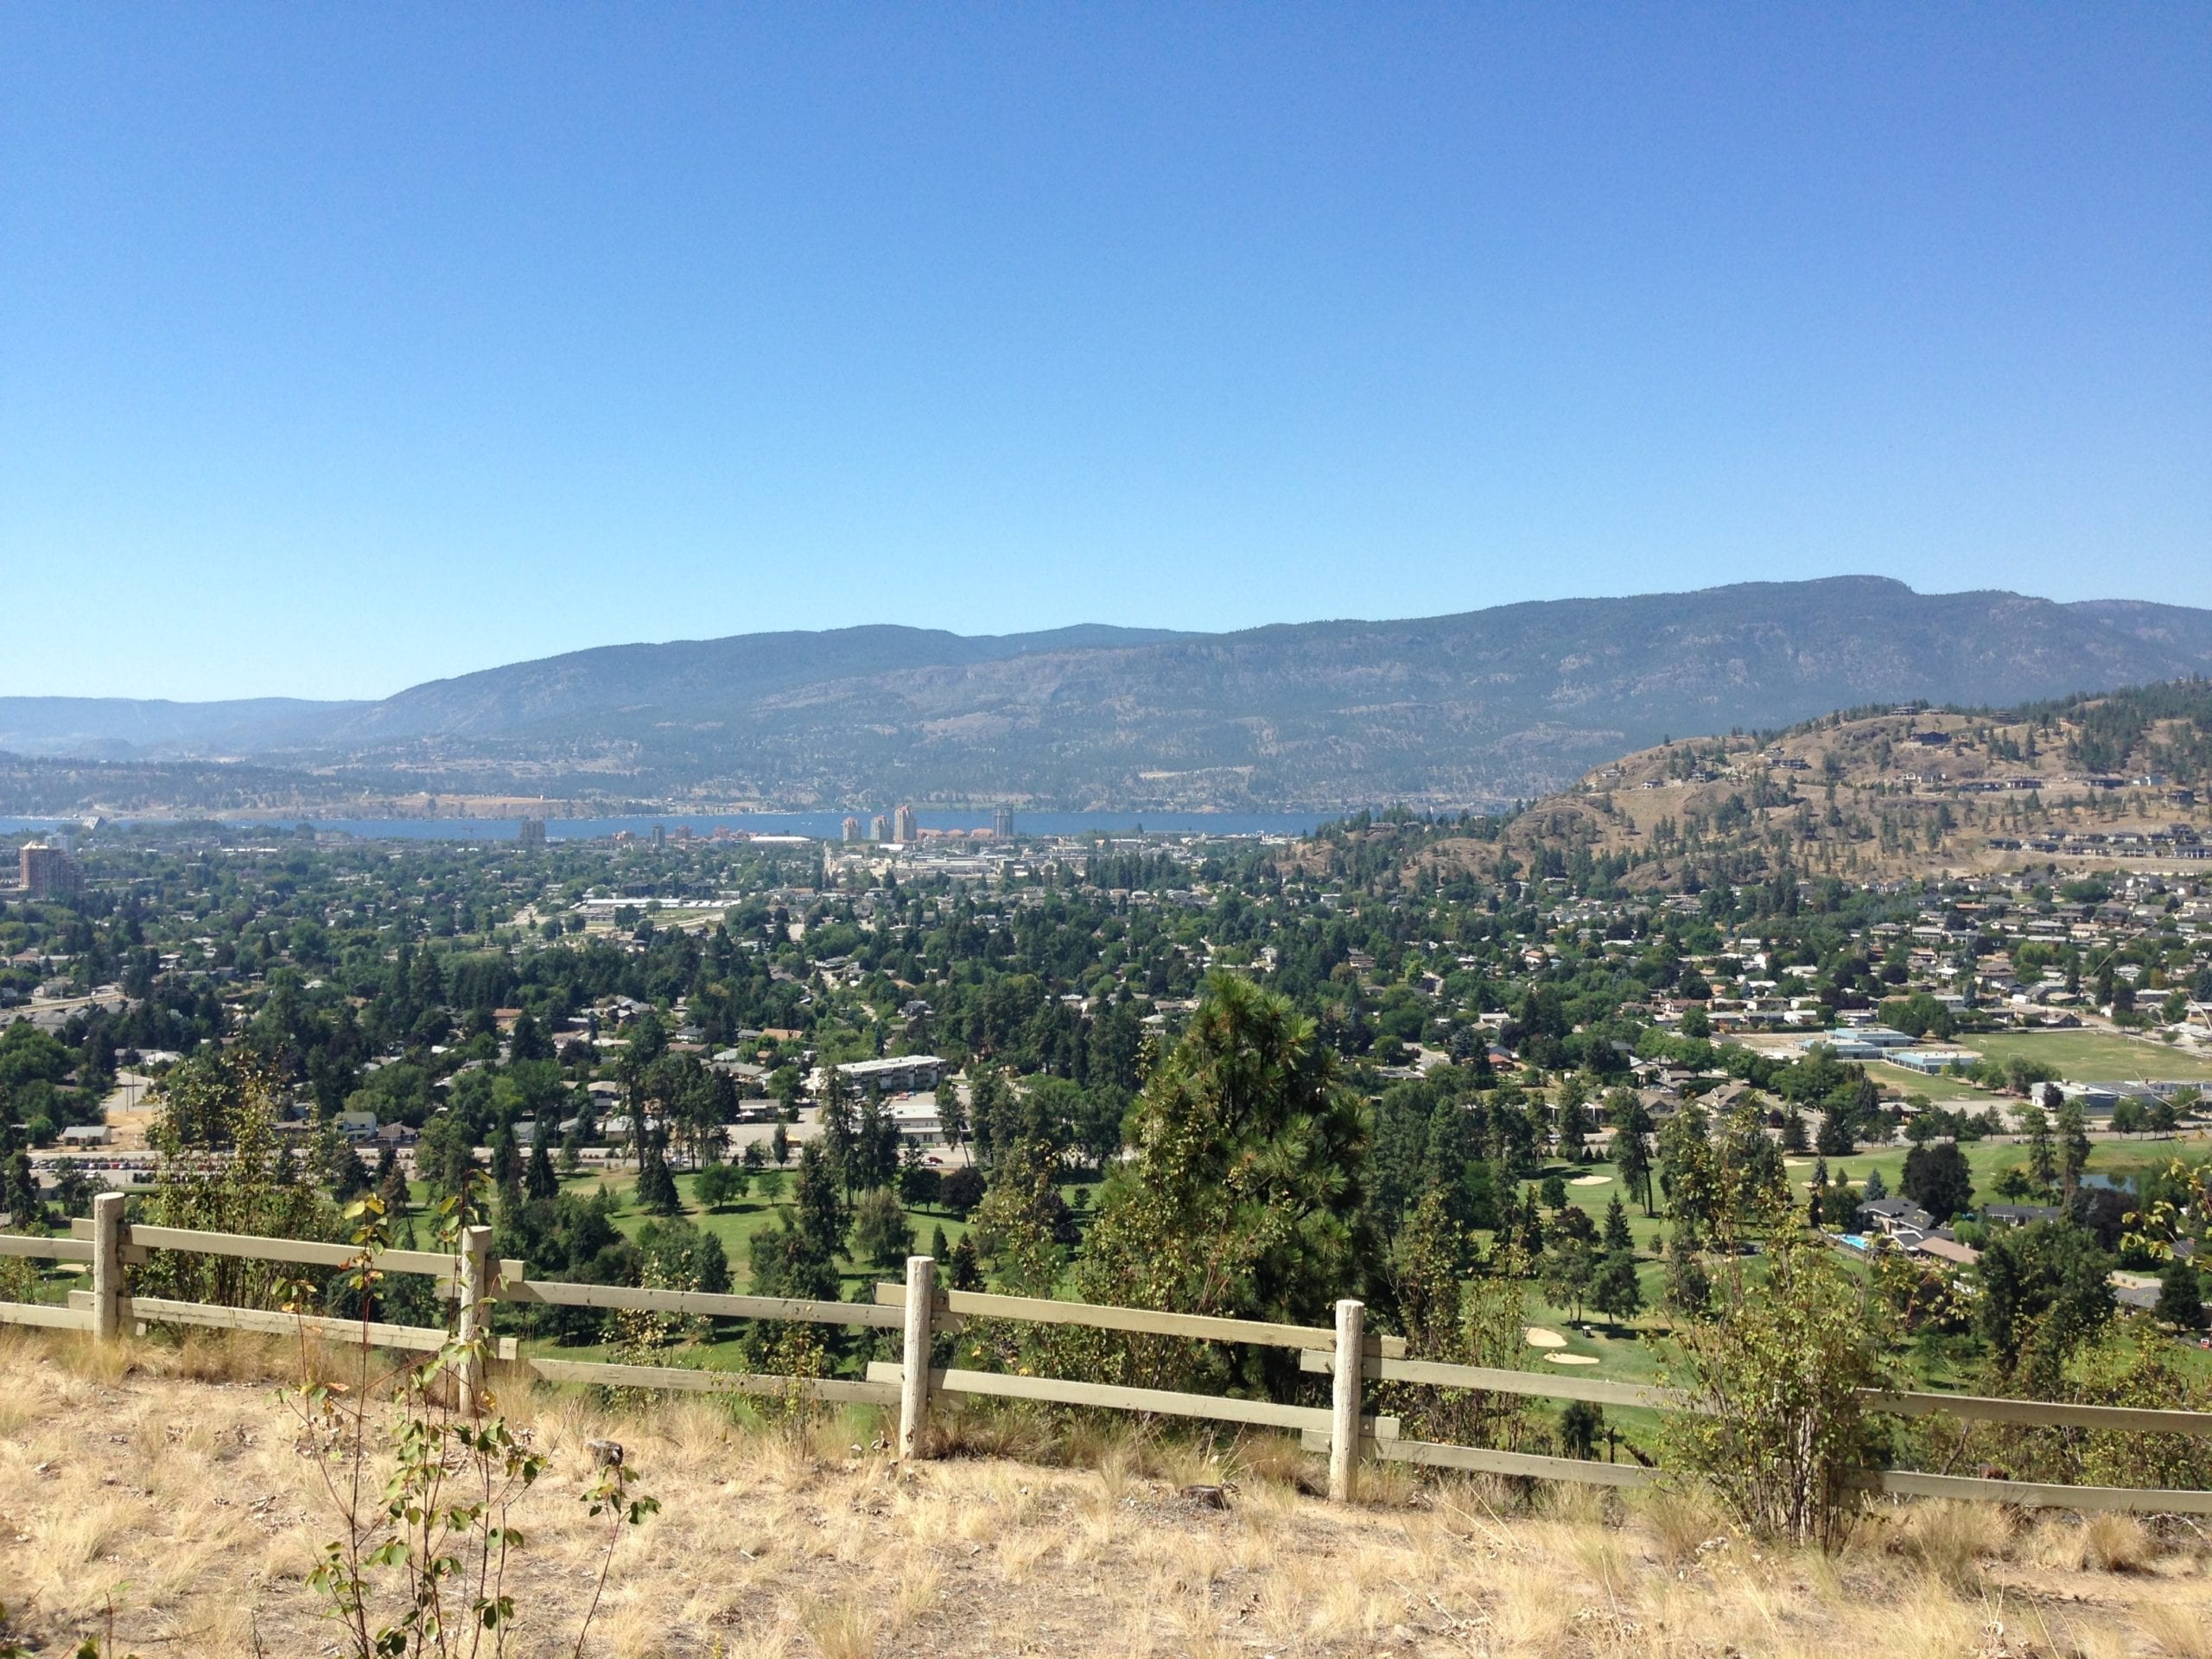 Valley view of residential Kelowna on a clear sunny day, with mountains and Okanagan lake in background